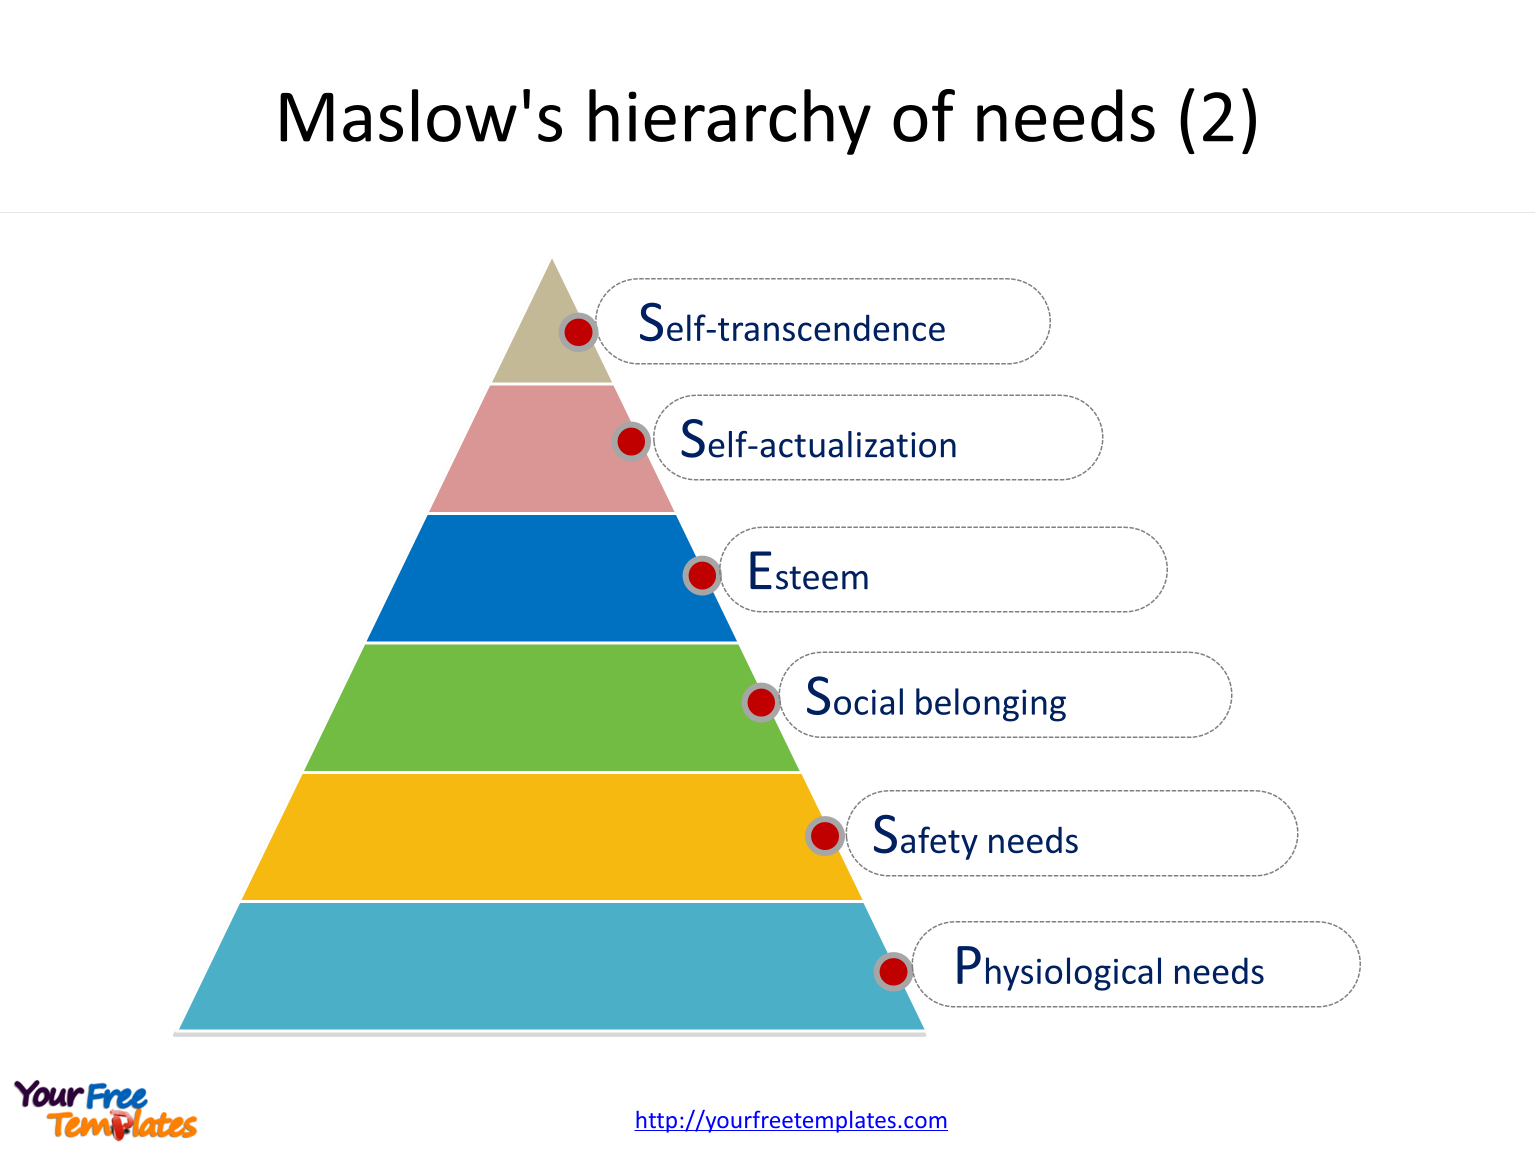 Maslow’s hierarchy of needs of six levels